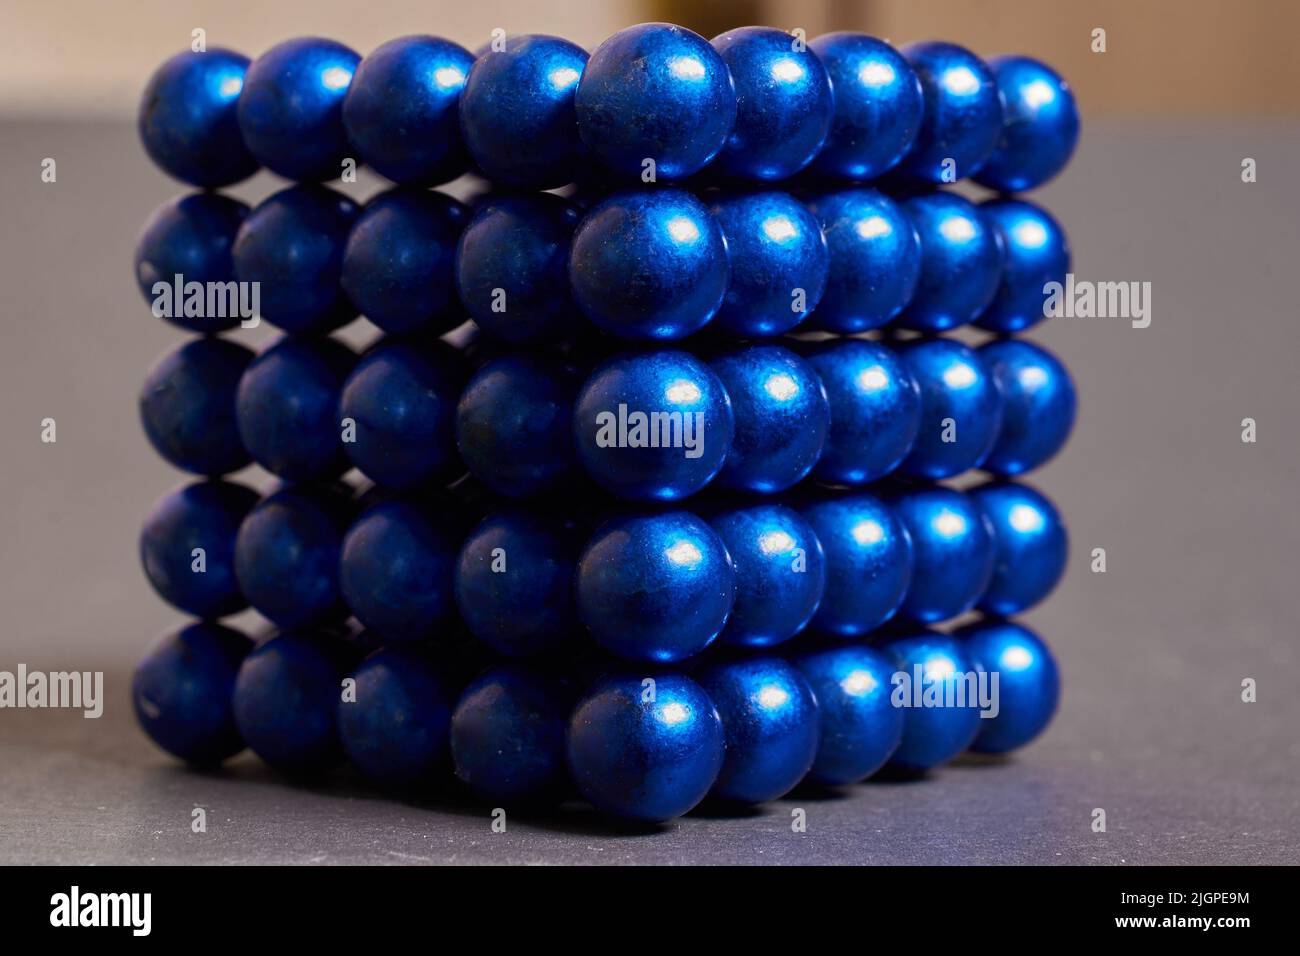 Magnetic cube made of blue metal balls on a colored background Stock Photo